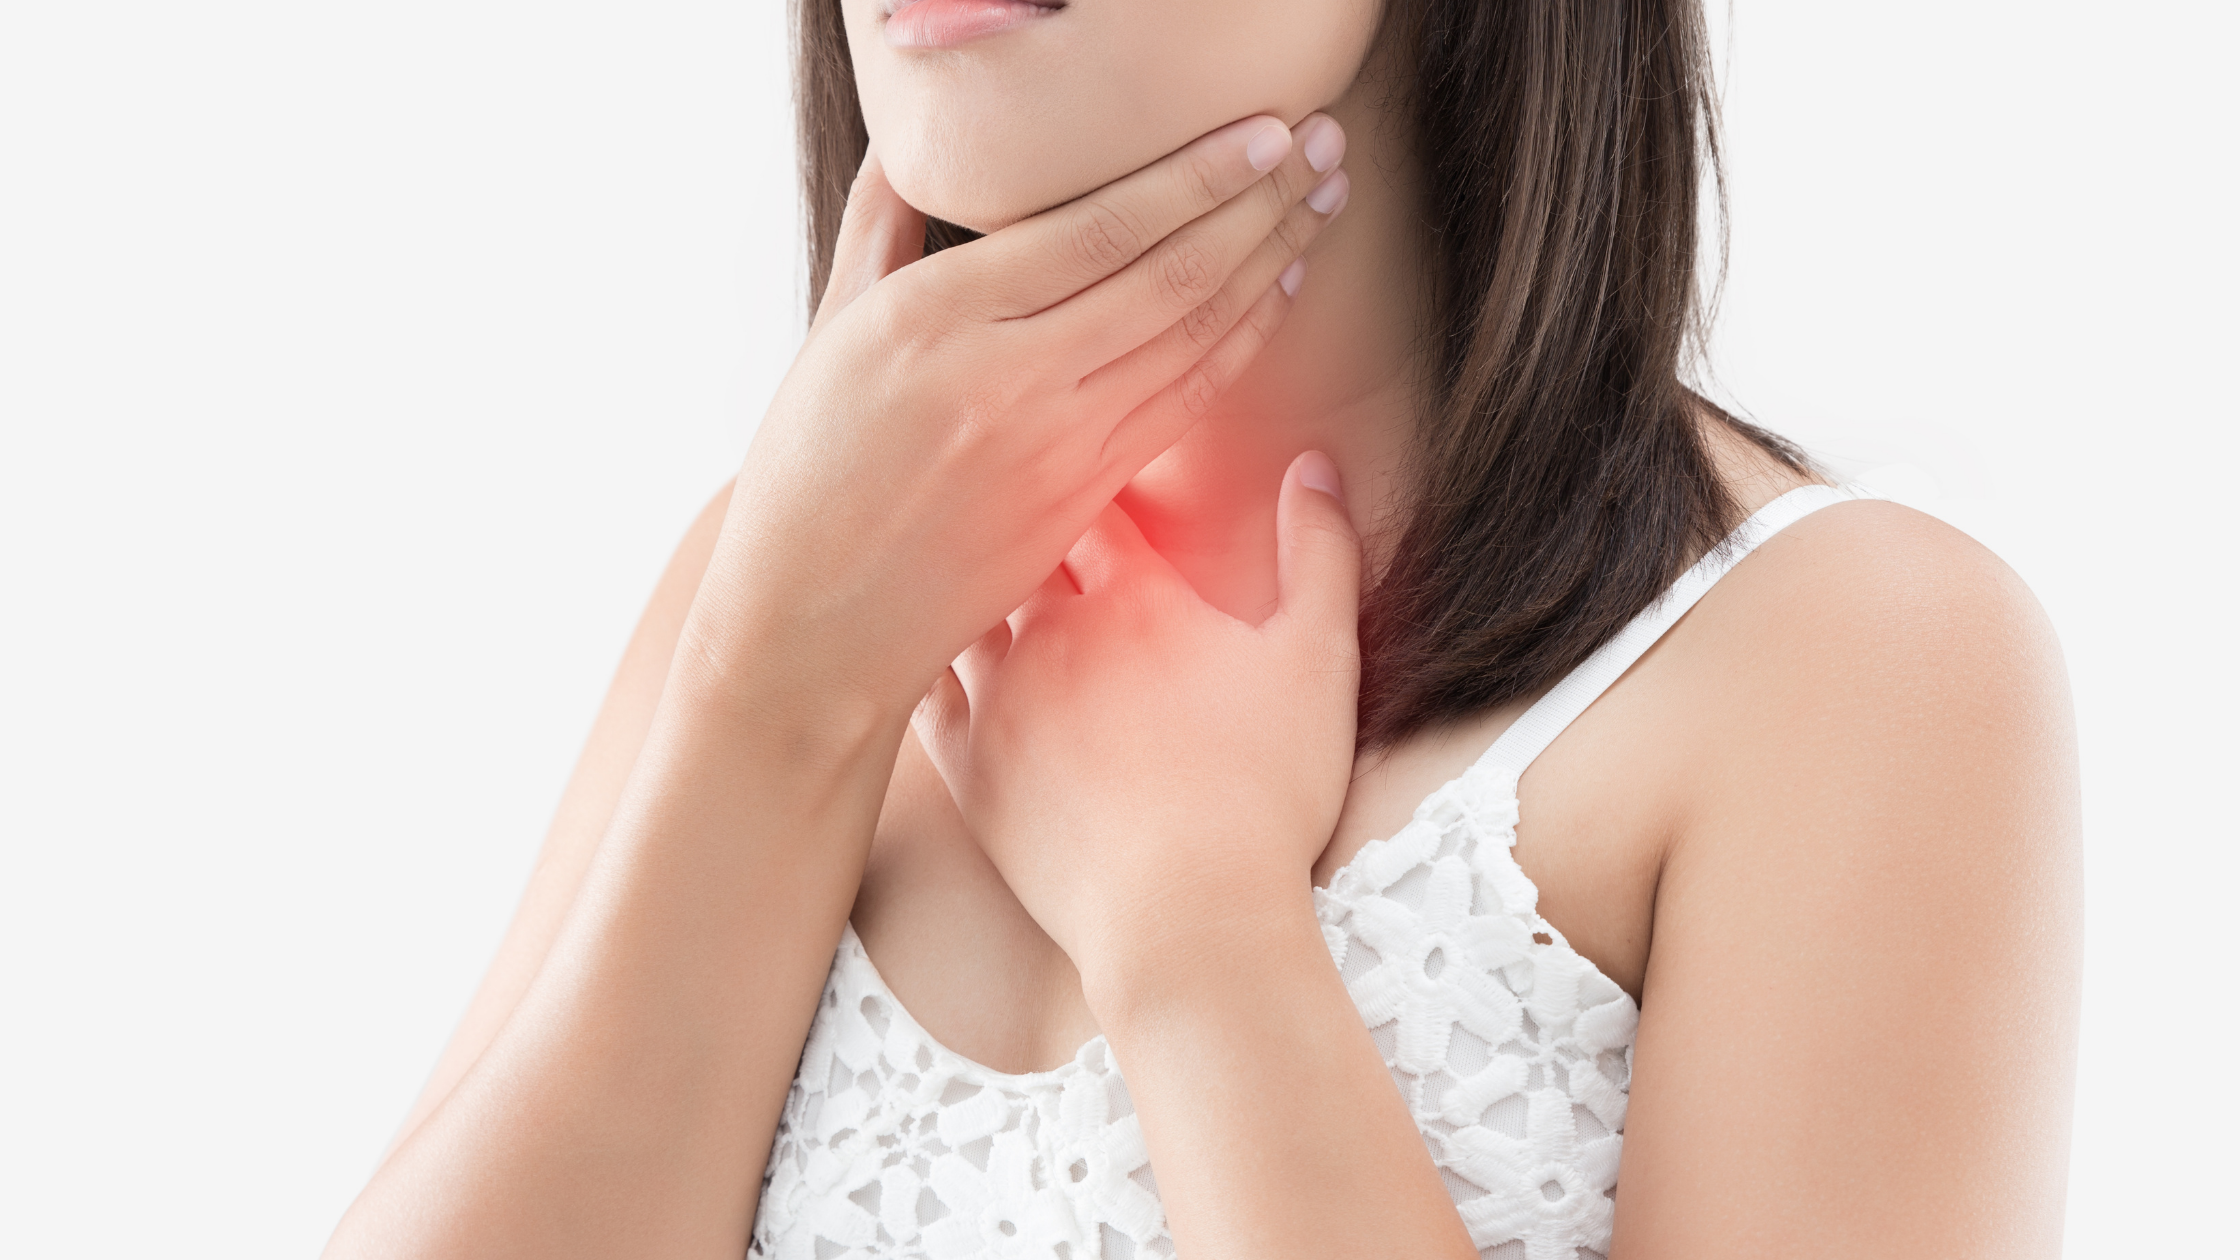 A woman holds both hands over her sore throat